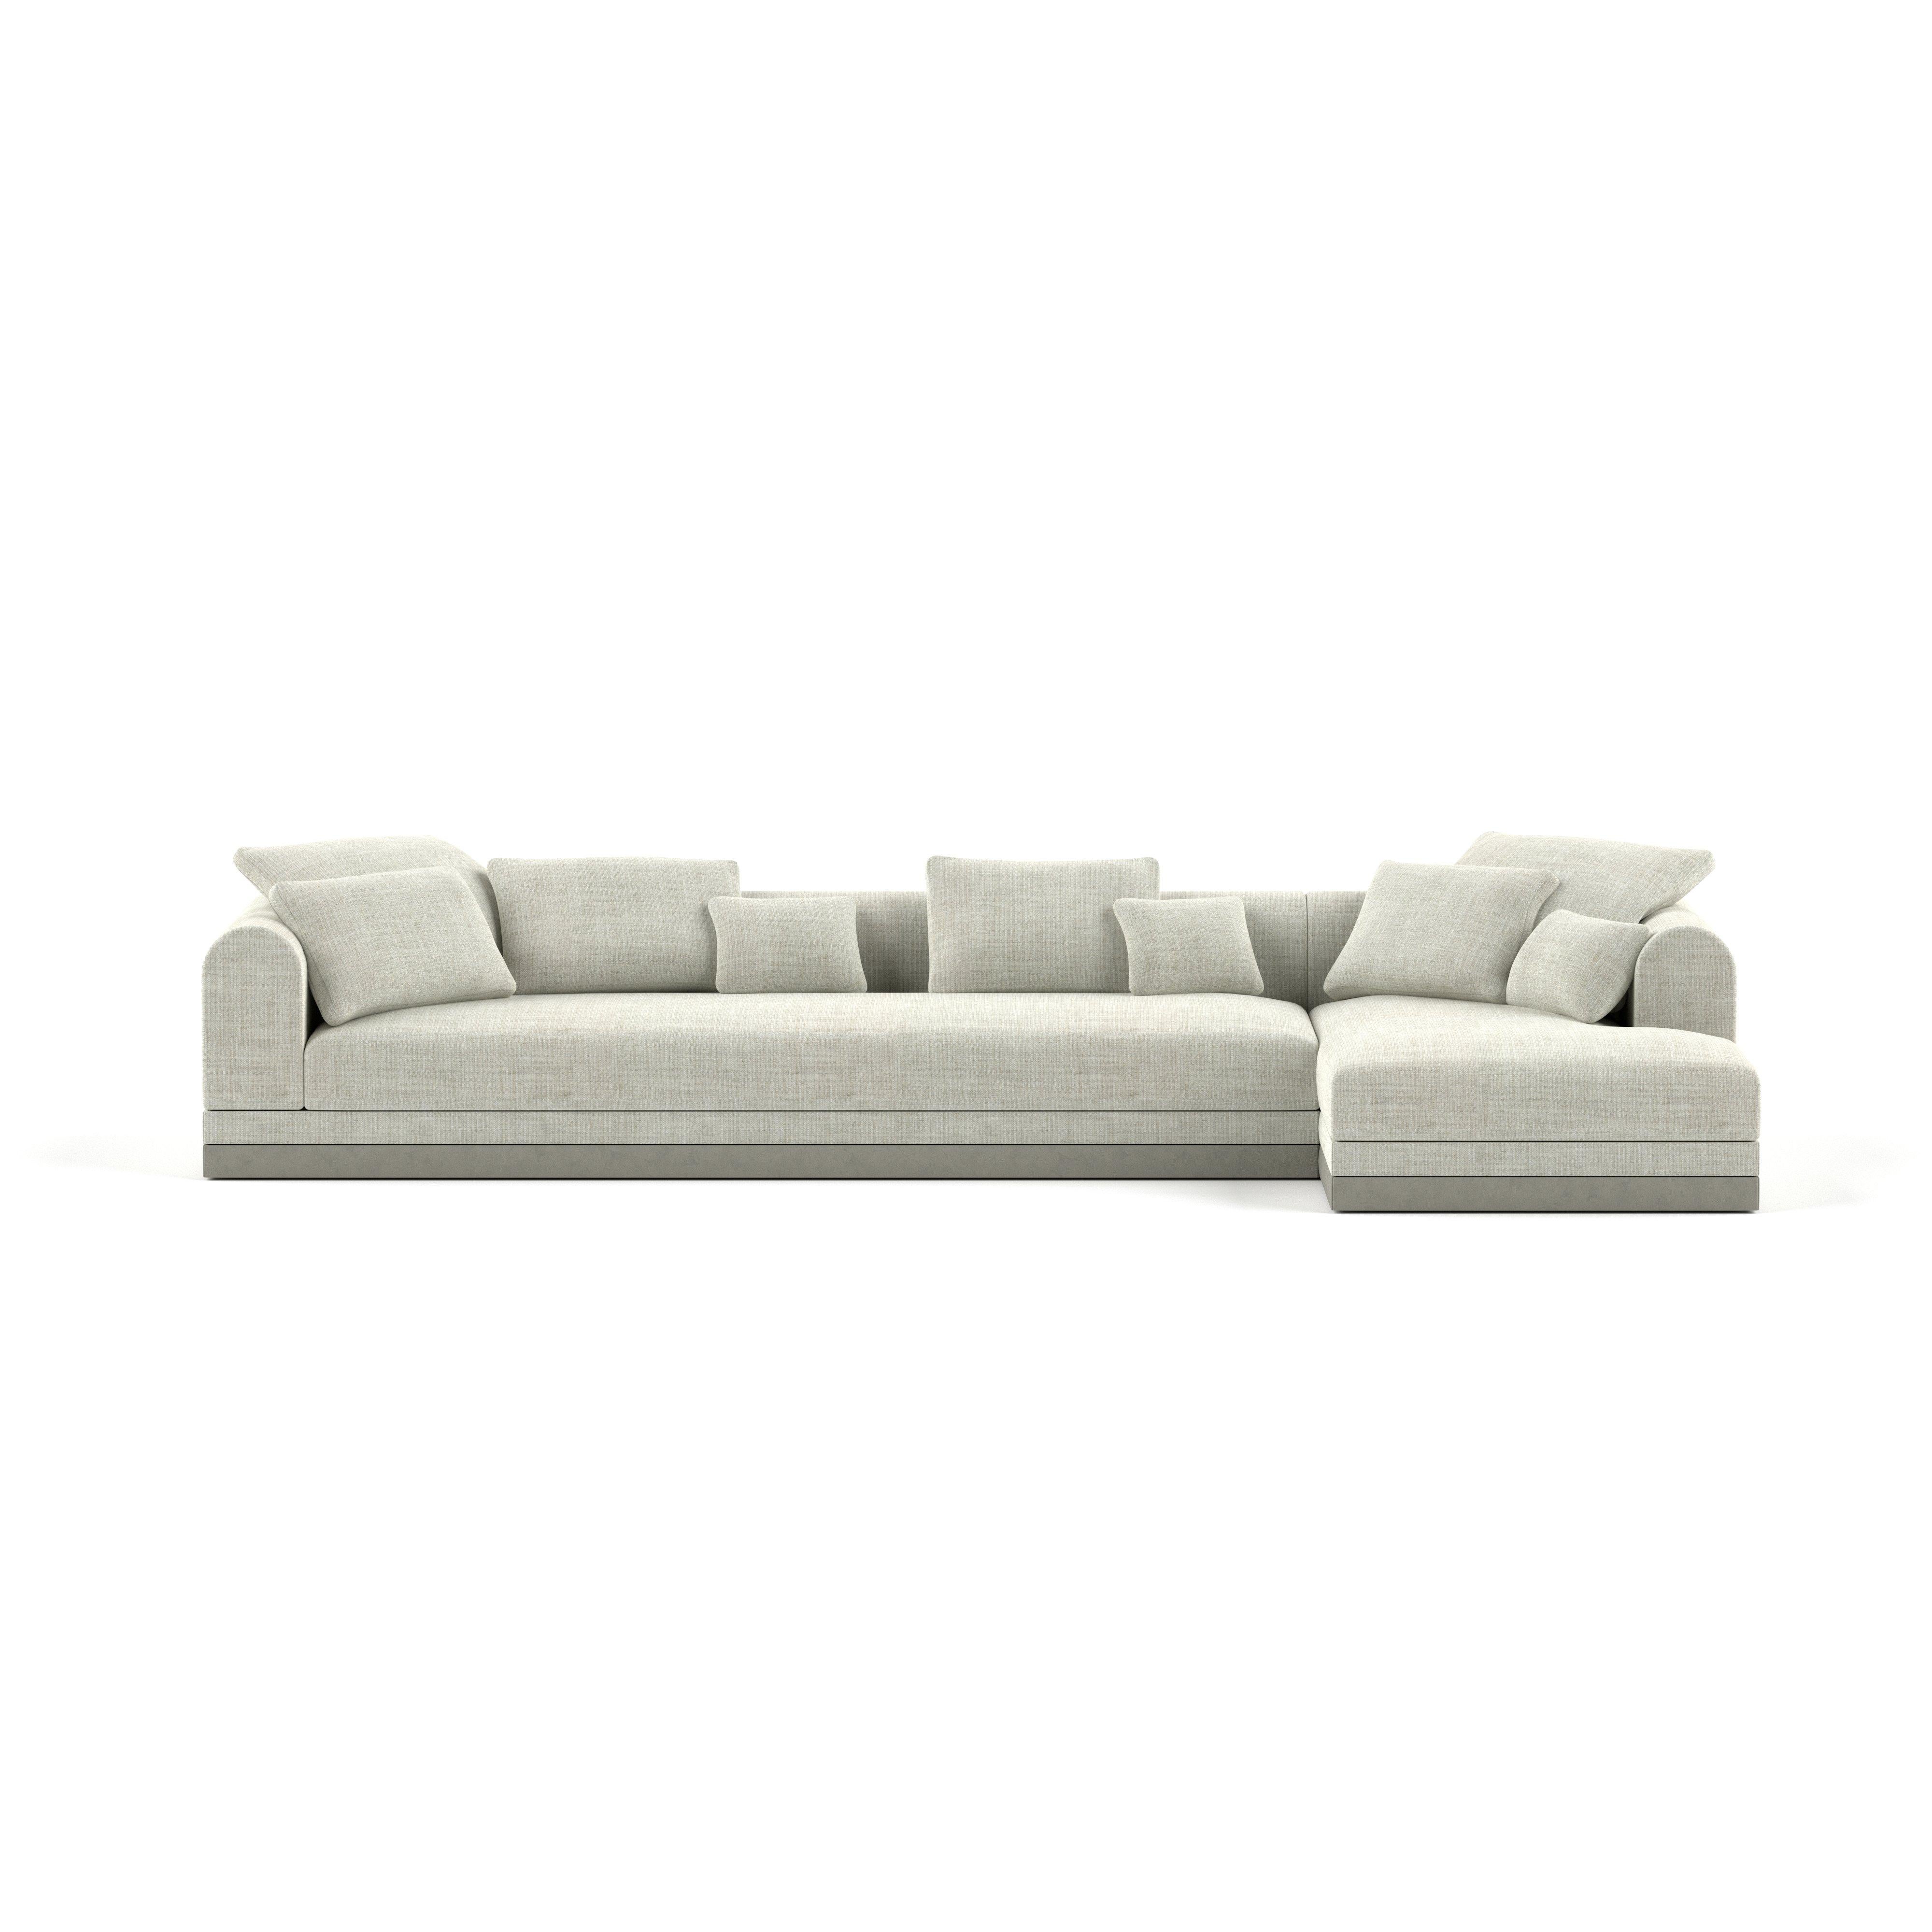 'Aqueduct' Contemporary Sofa by Poiat, Setup 2, Yang 95, Low Plinth For Sale 3